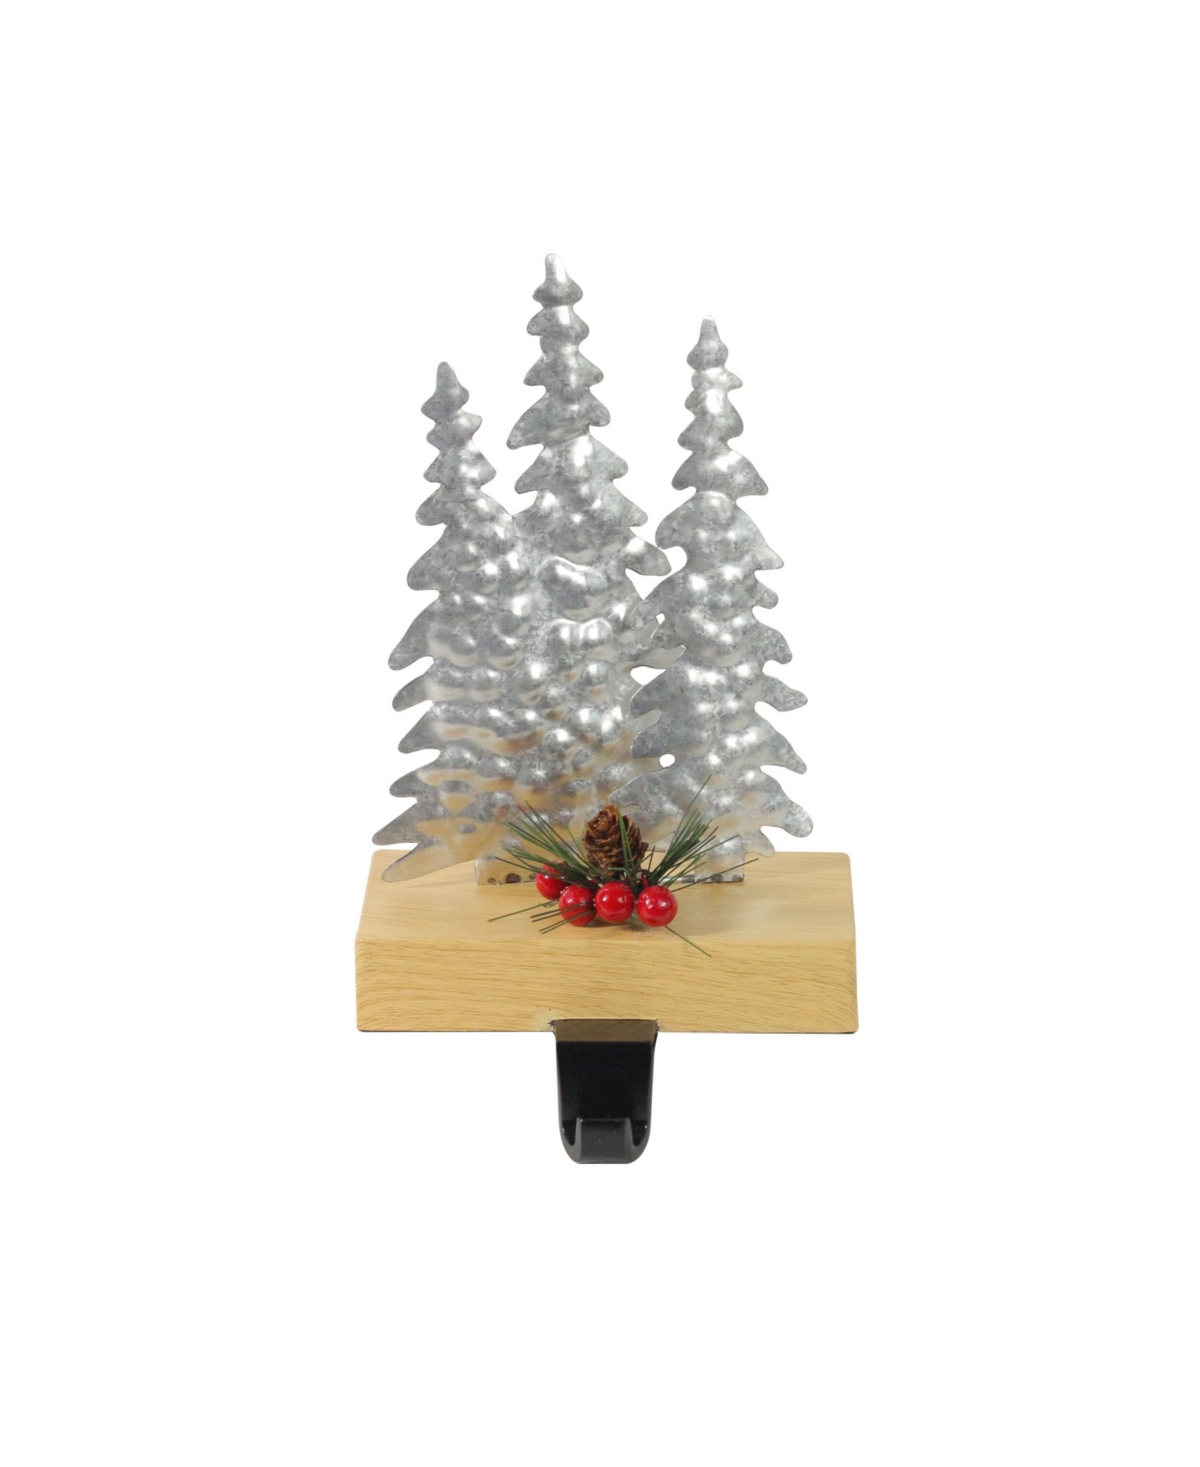 Wooden Christmas Trees Stocking Holder - Silver